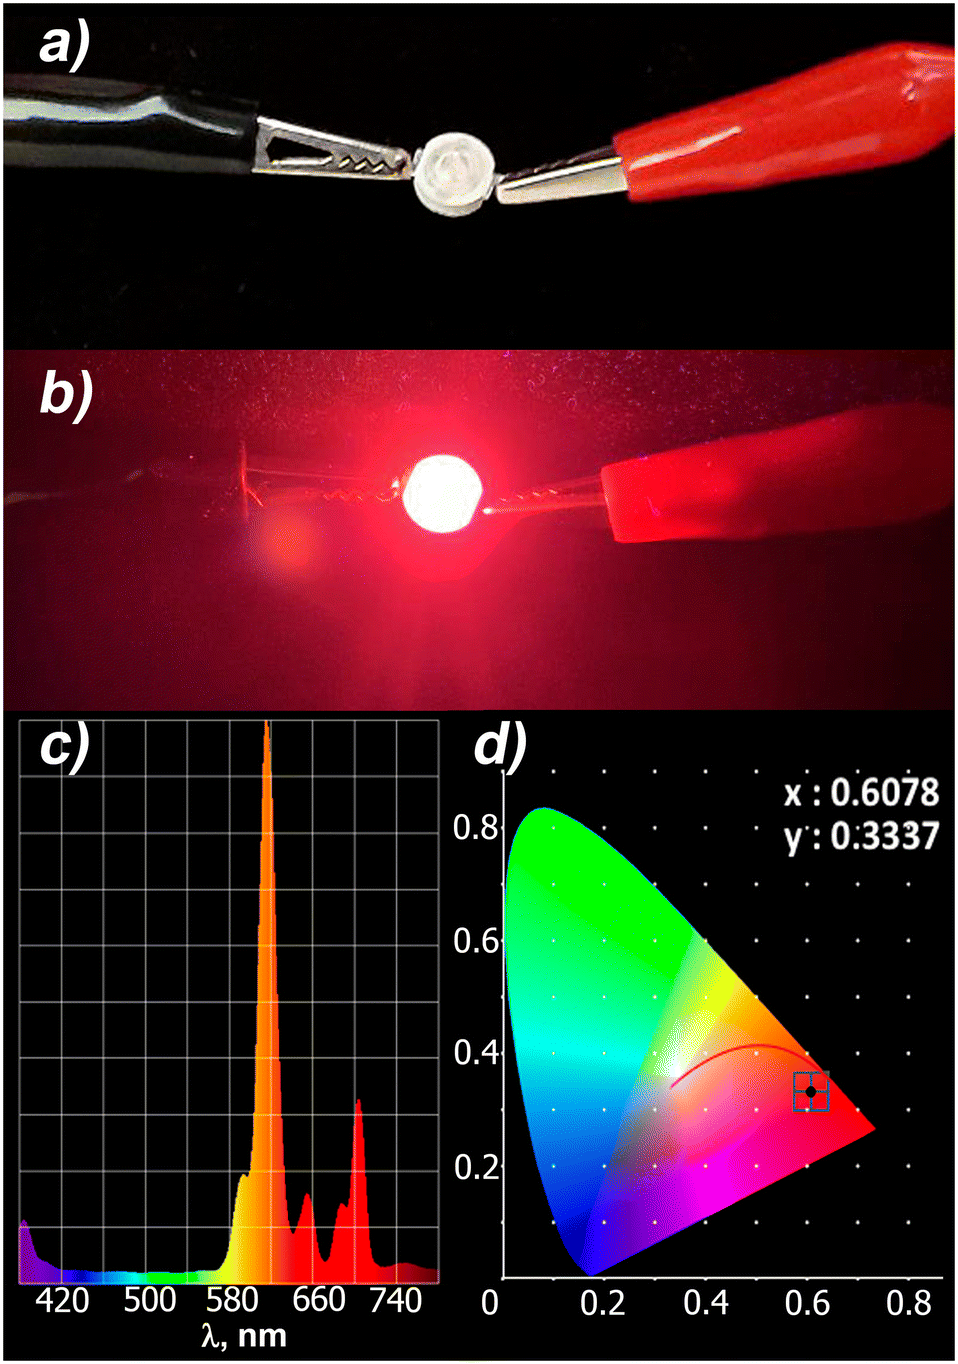 K 5 Eu(MoO 4 ) 4 red phosphor for solid state lighting applications,  prepared by different techniques - CrystEngComm (RSC Publishing)  DOI:10.1039/D2CE01107G